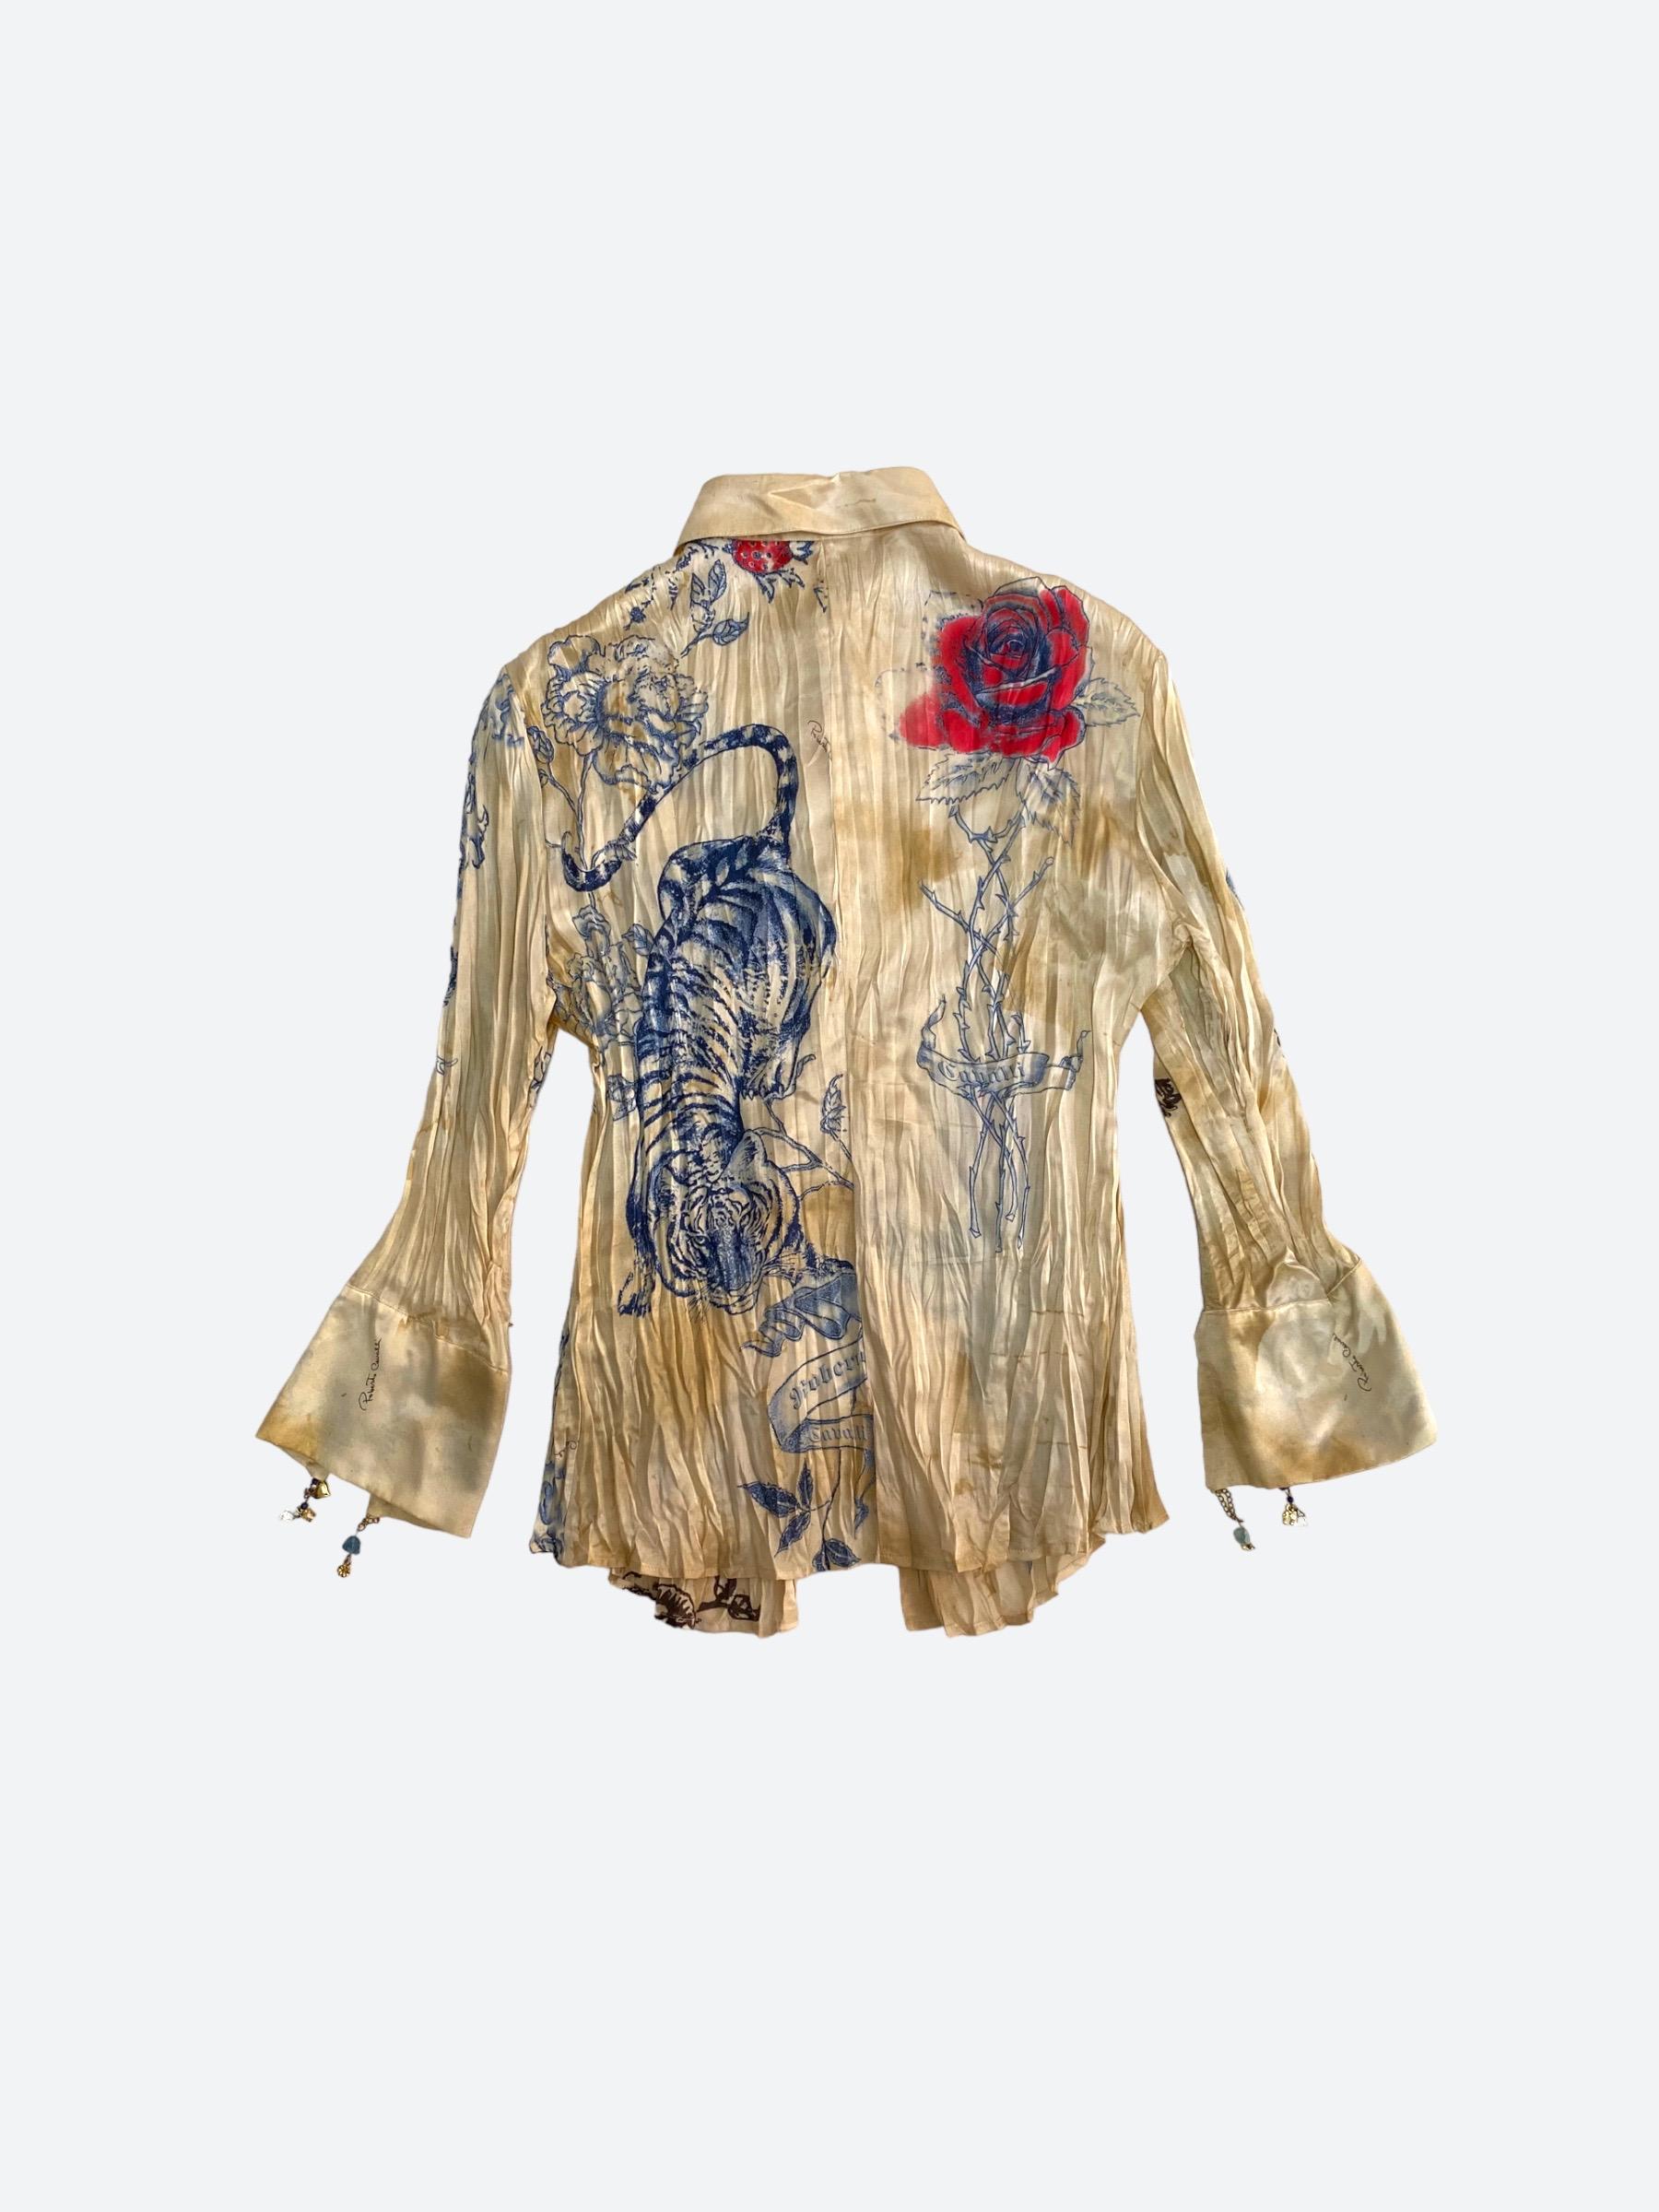 This golden-toned, 100% silk shirt displays a blue and red graphic chinoiserie print that resembles tattoos, along with delicate jewel embellishments on the cuffs. 

The darker toned areas and Cavalli-signature creased finish of the silk fabric